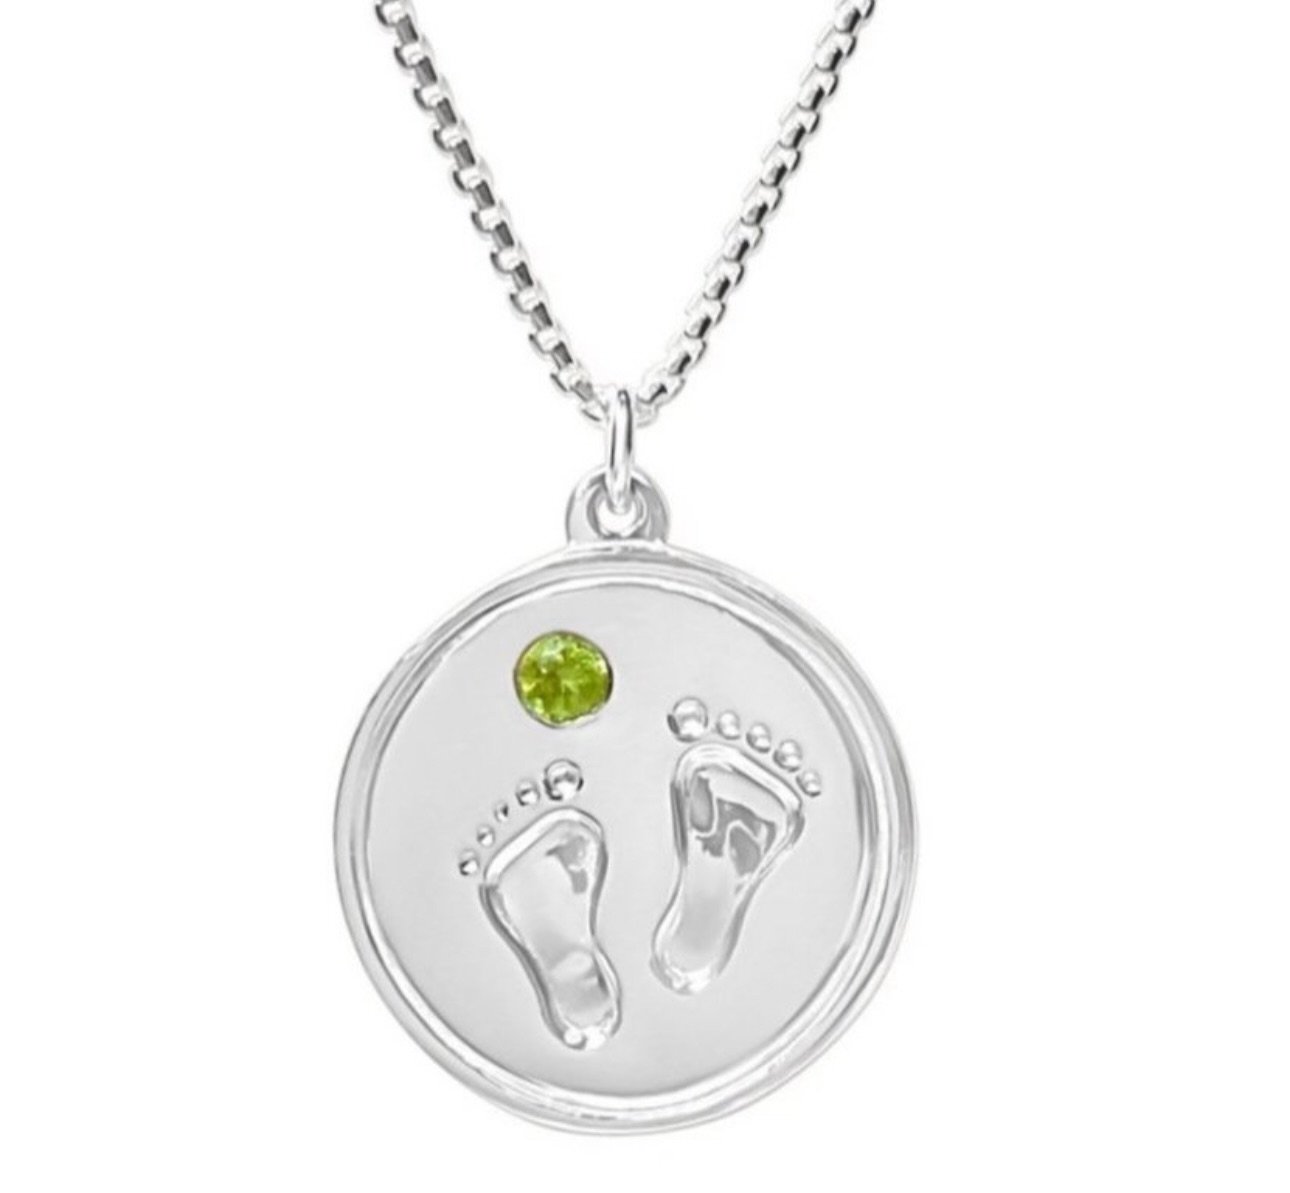 FOR THE NEW MOM! Baby Feet With Birthstone Pendant. Thoughtful and perfect for Mother&rsquo;s Day! 🩵 We have at the shop and on betsyfrostdesign.com  under &ldquo;Shop By Collection/ Baby Feet With Birthstones&rdquo;